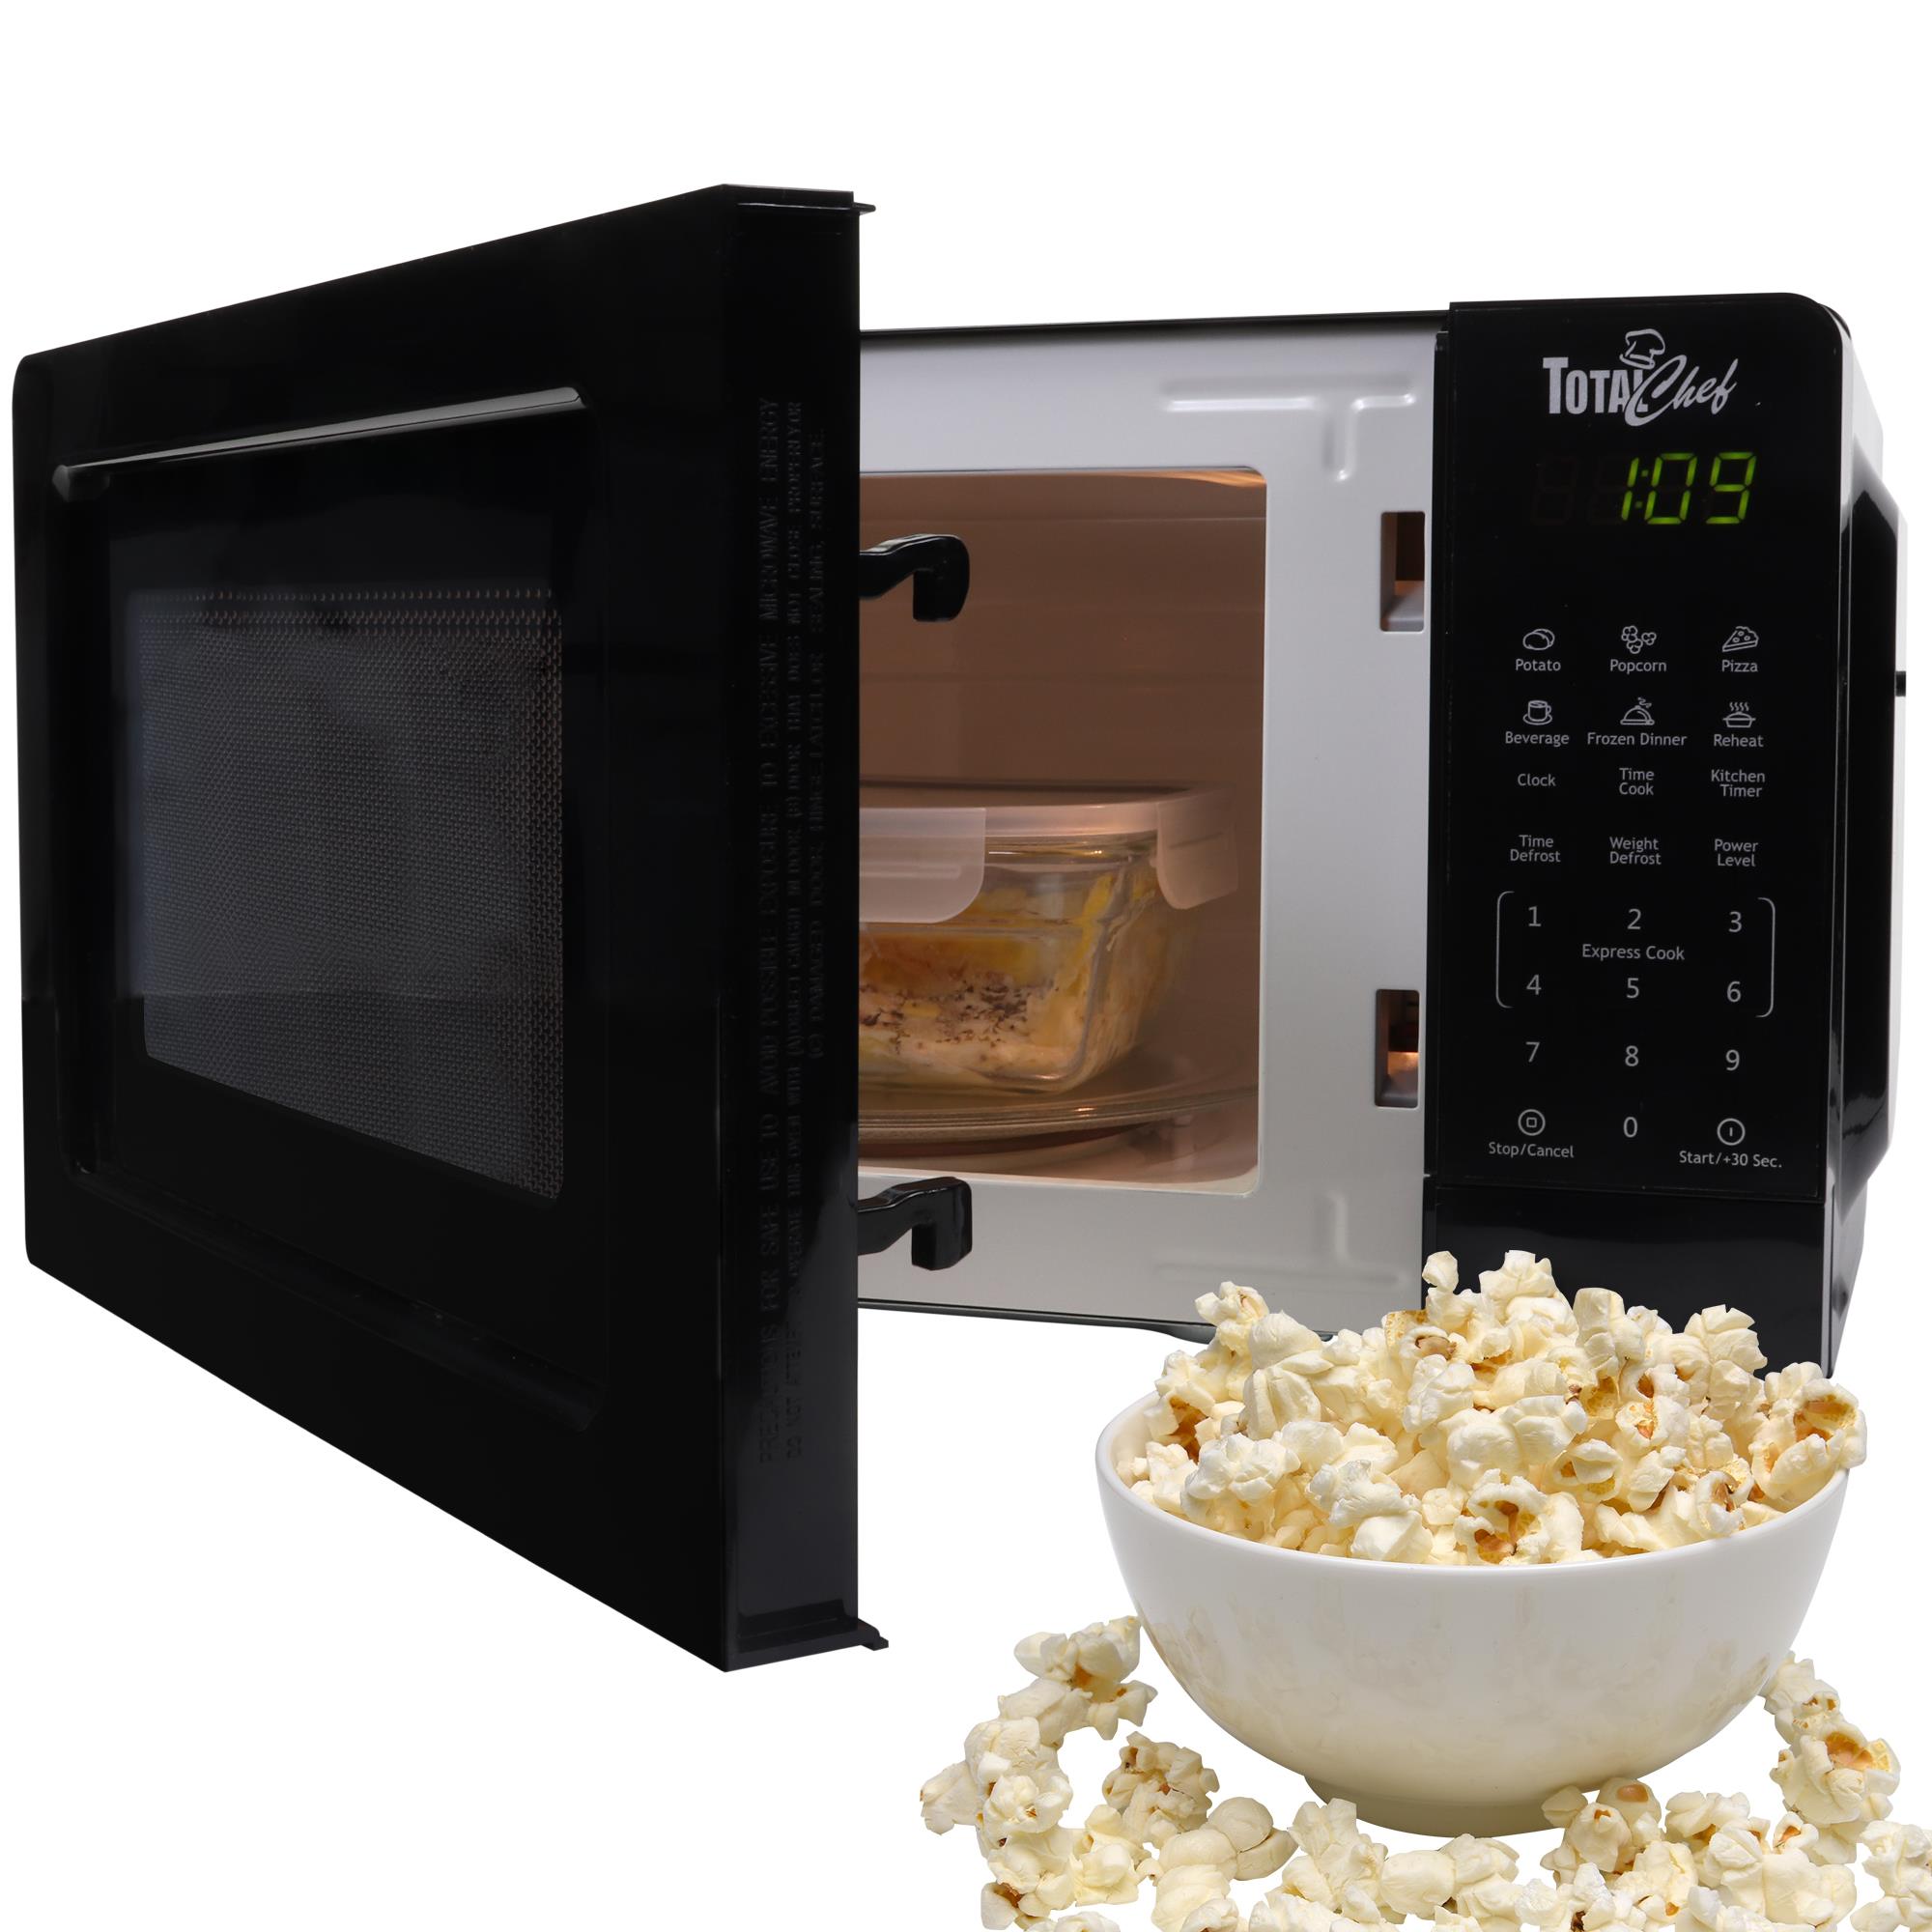 Commercial Chef 0.7-cu ft 700-Watt Countertop Microwave (Black) in the  Countertop Microwaves department at